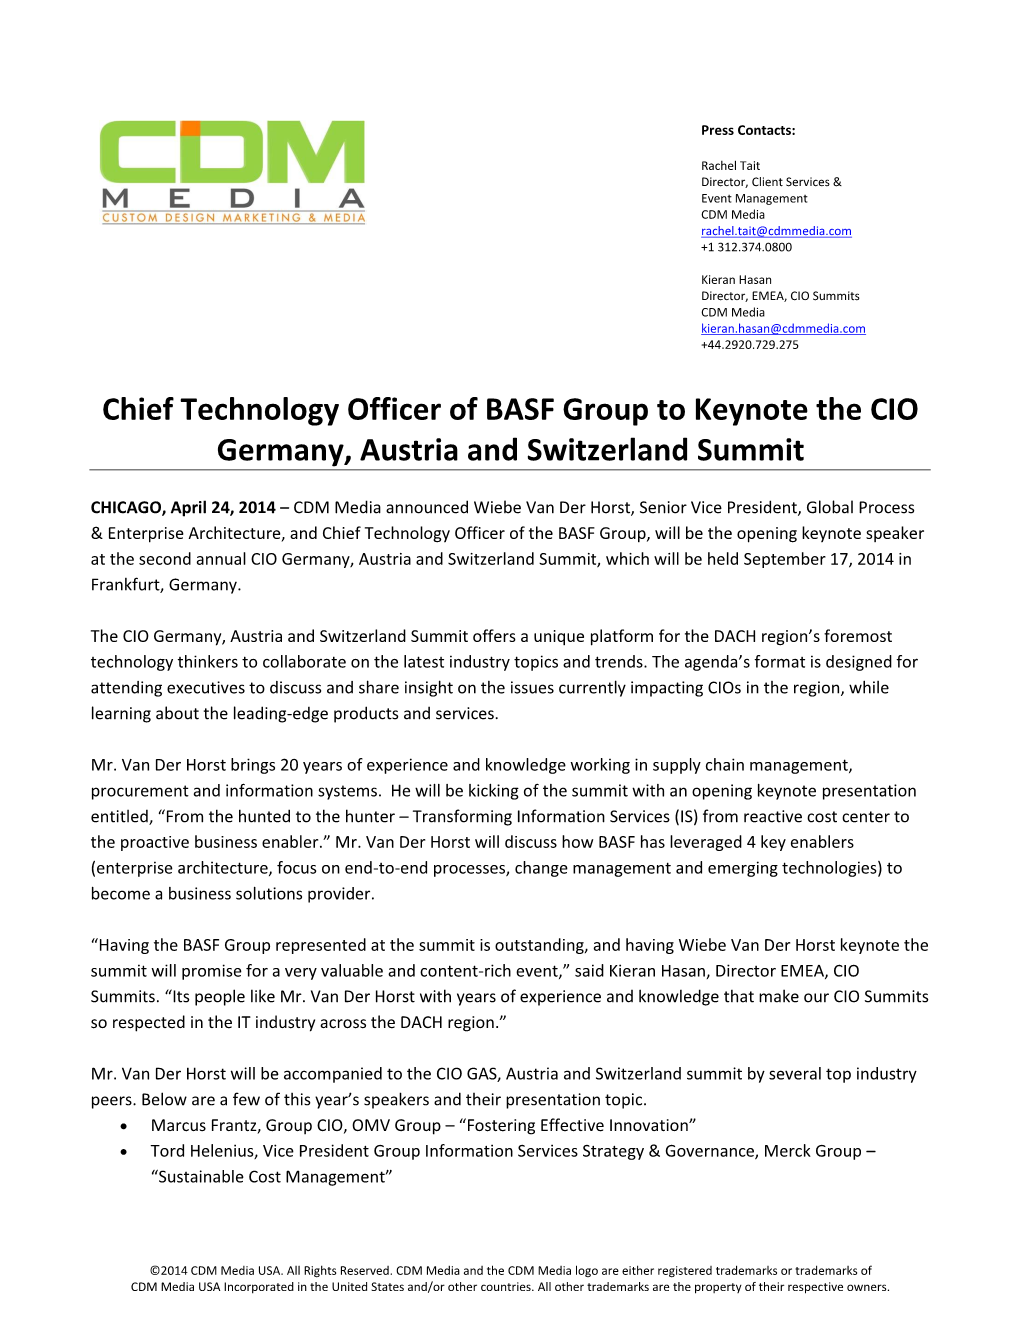 Chief Technology Officer of BASF Group to Keynote the CIO Germany, Austria and Switzerland Summit